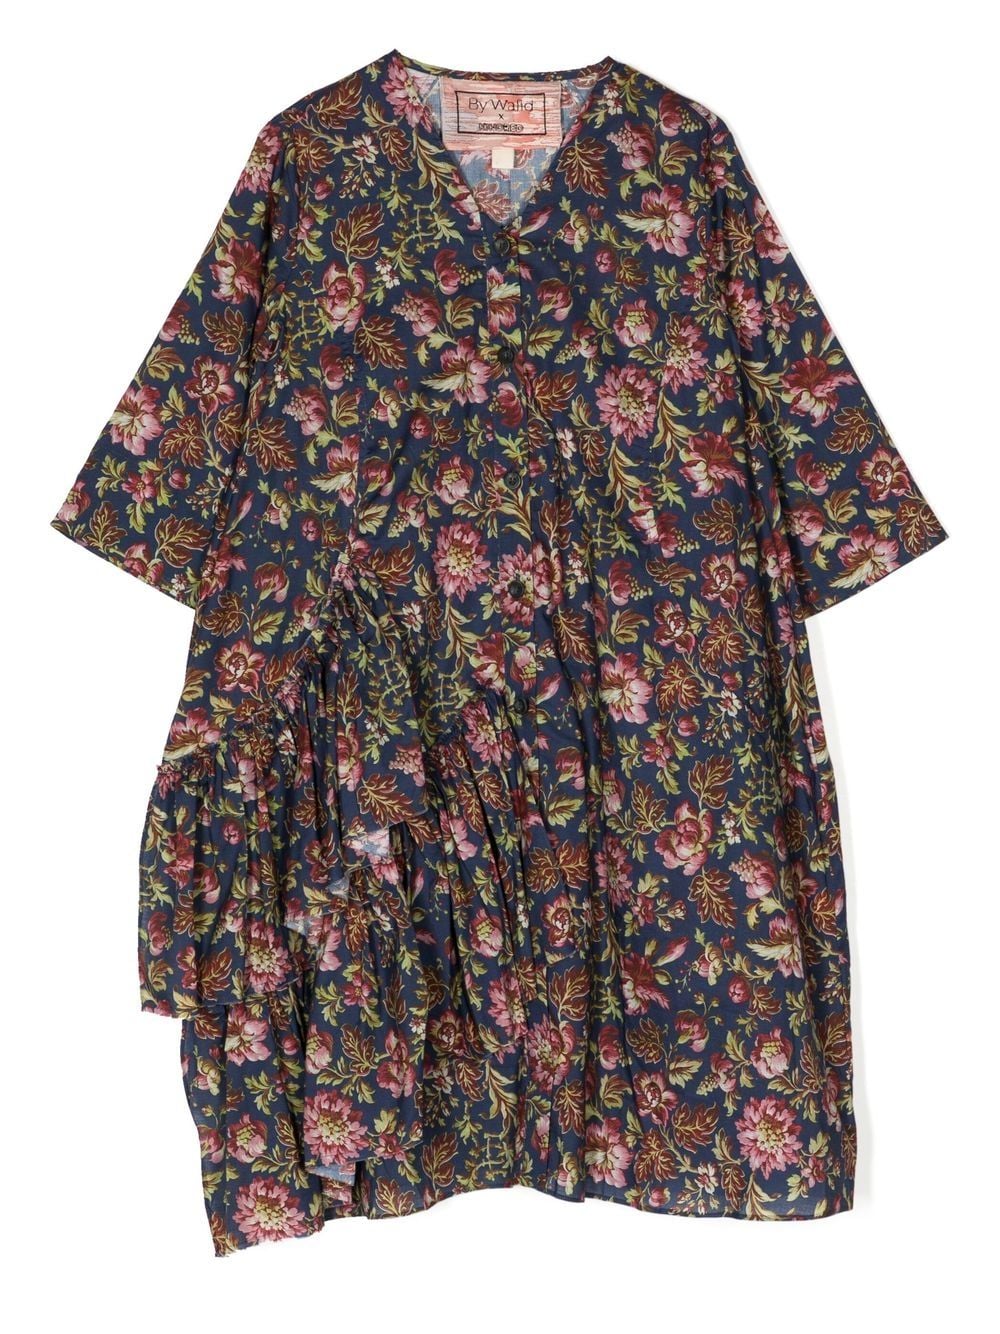 By Walid x Kindred floral-print dress - Multicolour von By Walid